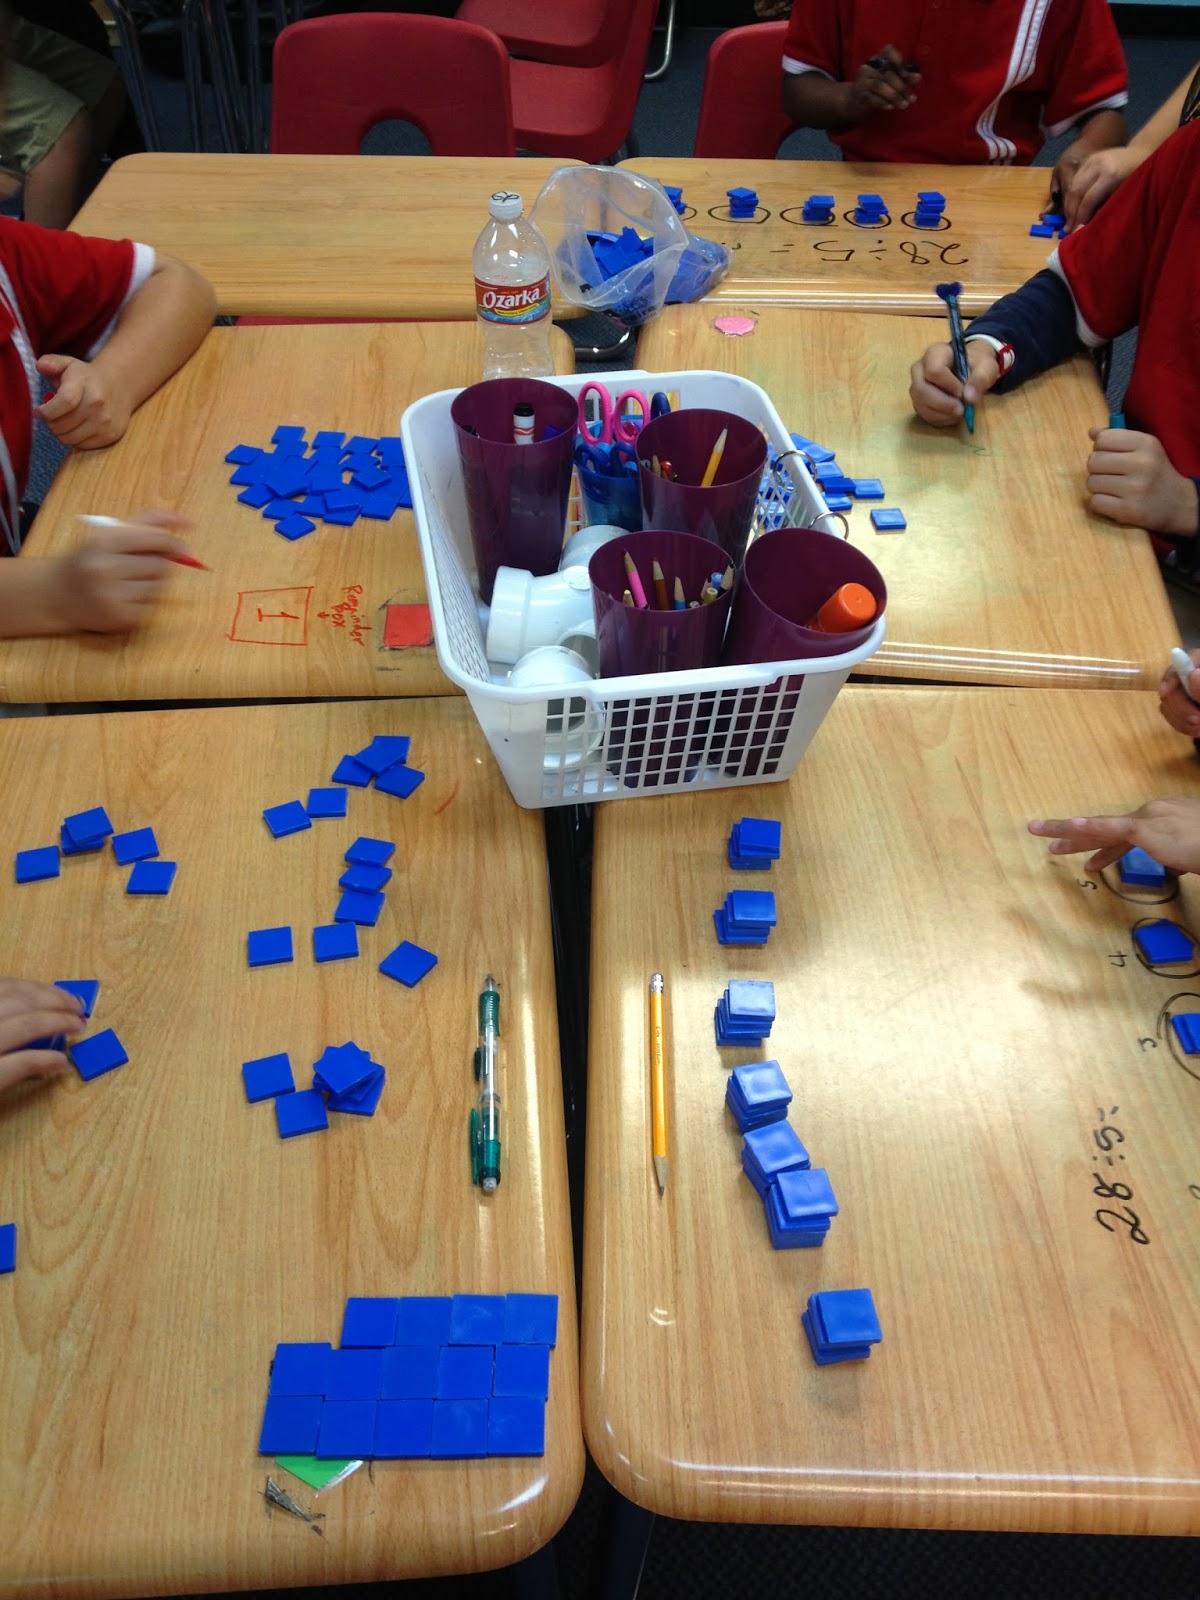 ms-cao-s-4th-grade-math-dividing-with-remainder-using-multiplication-facts-to-solve-for-division